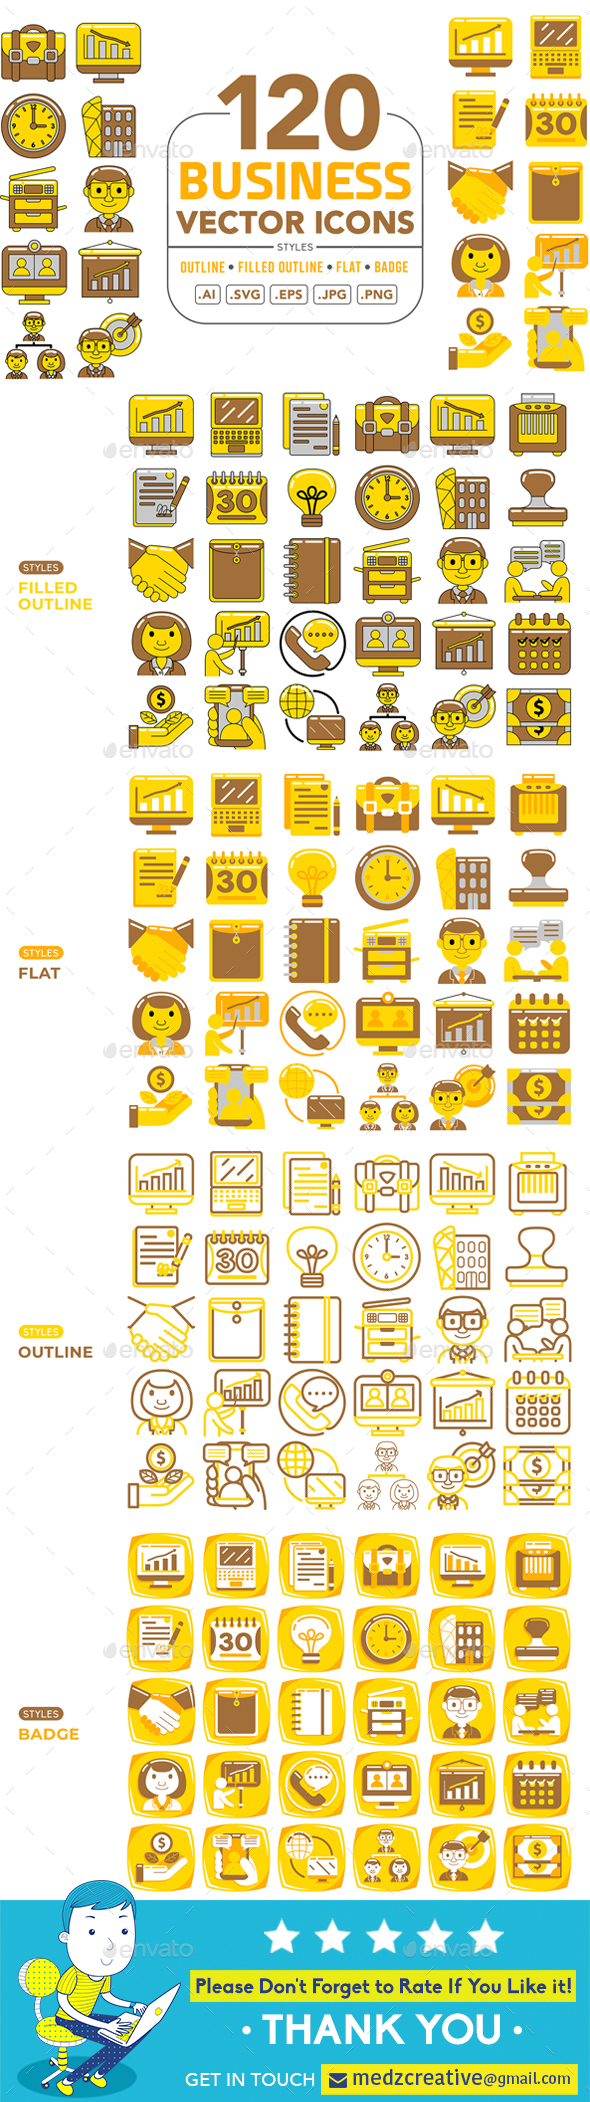 Business Vector Icons